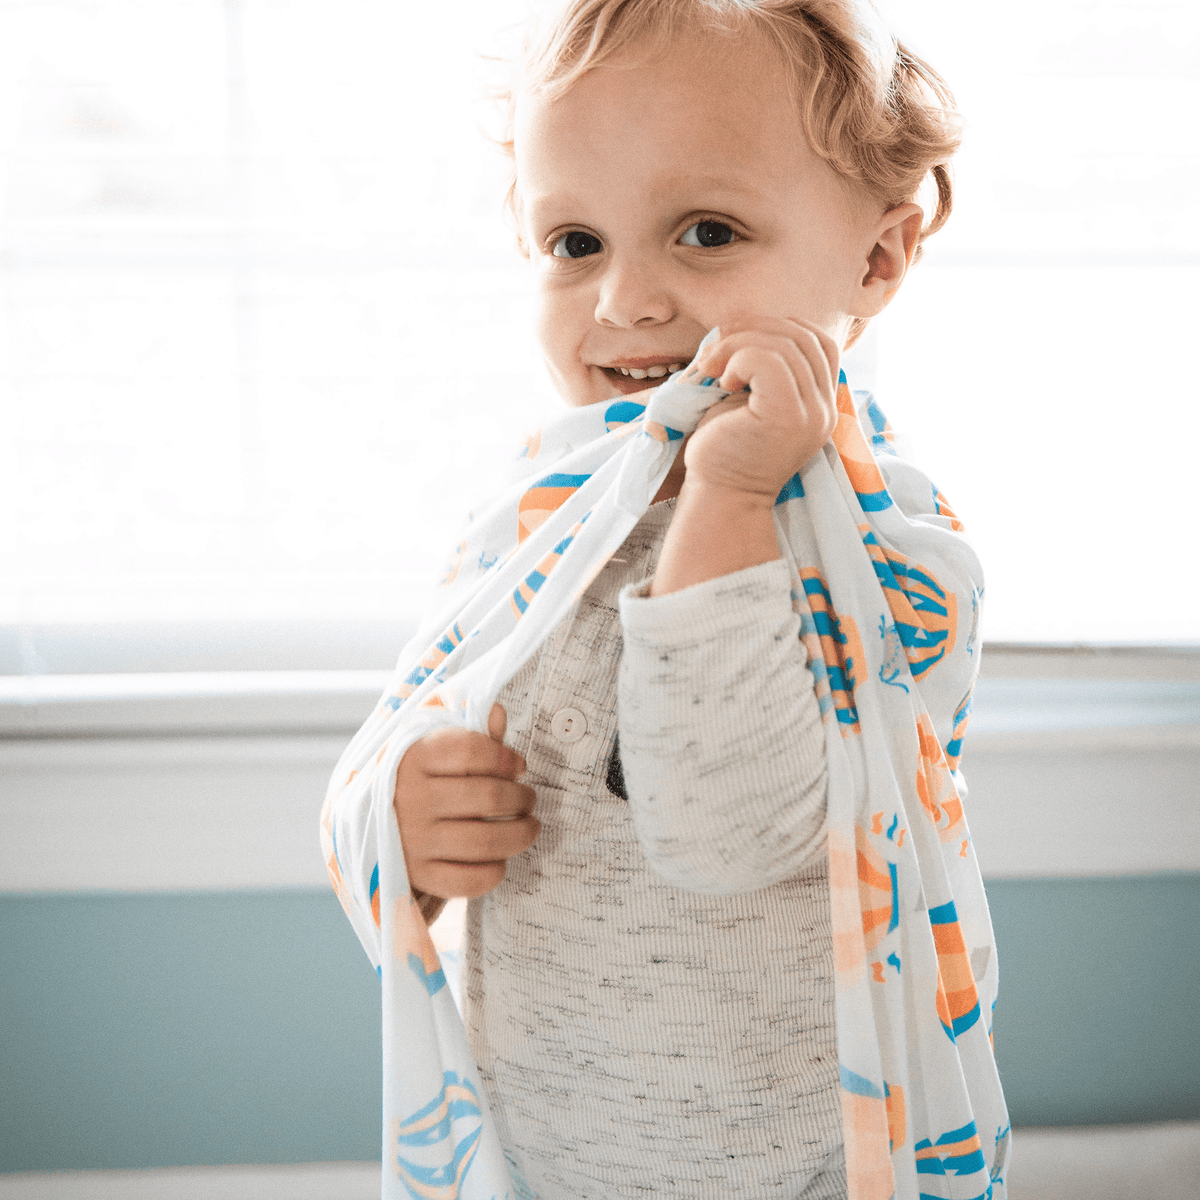 Toddler Girl Playing With Receiving Blanket